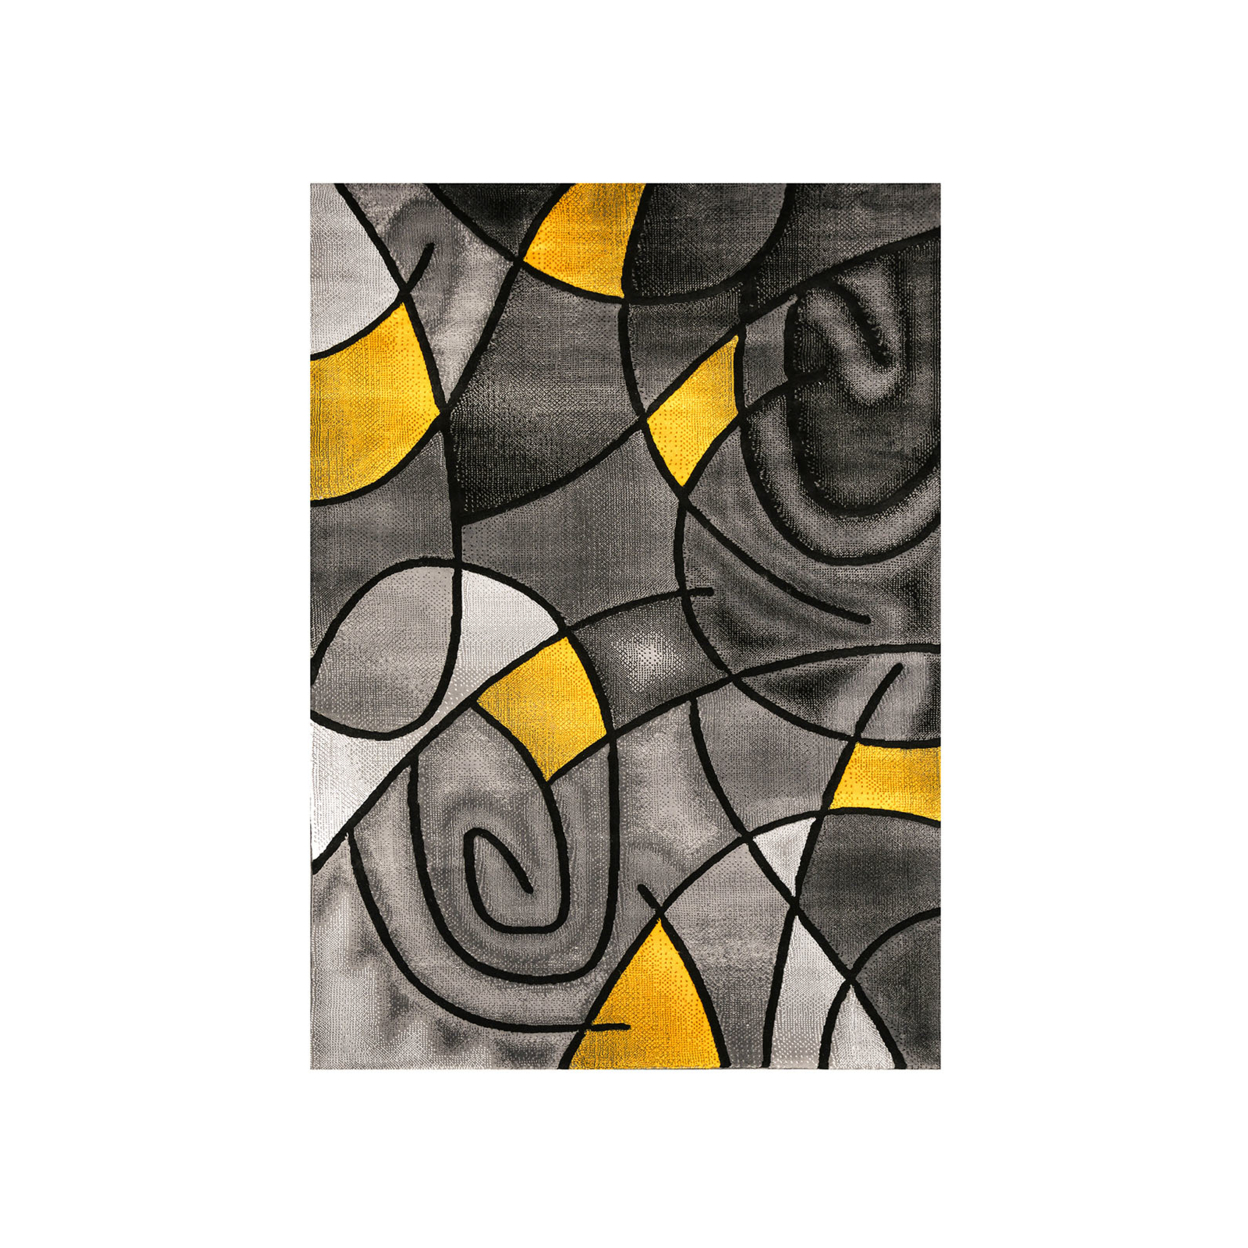 Patterned Area Rug In Polyester With Jute Mesh Backing, Small, Yellow & Gray- Saltoro Sherpi